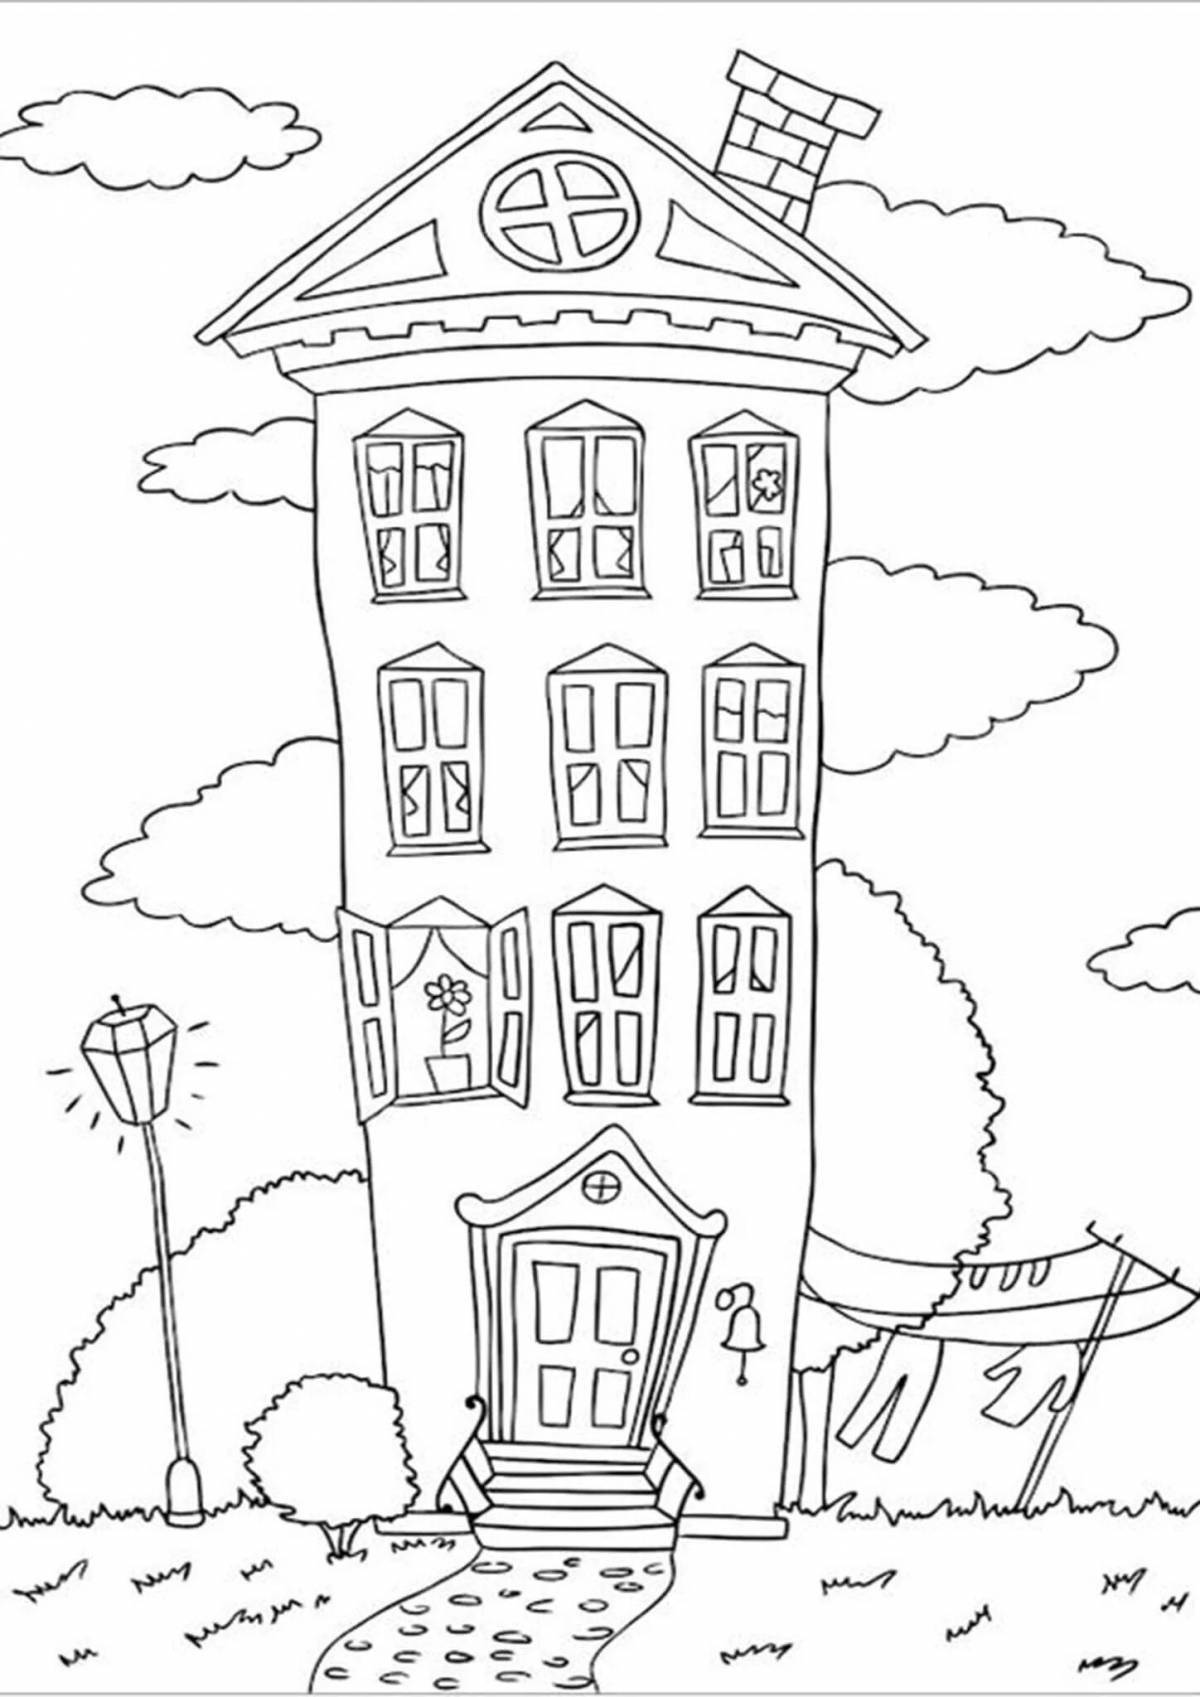 Exciting high-rise building coloring pages for kids